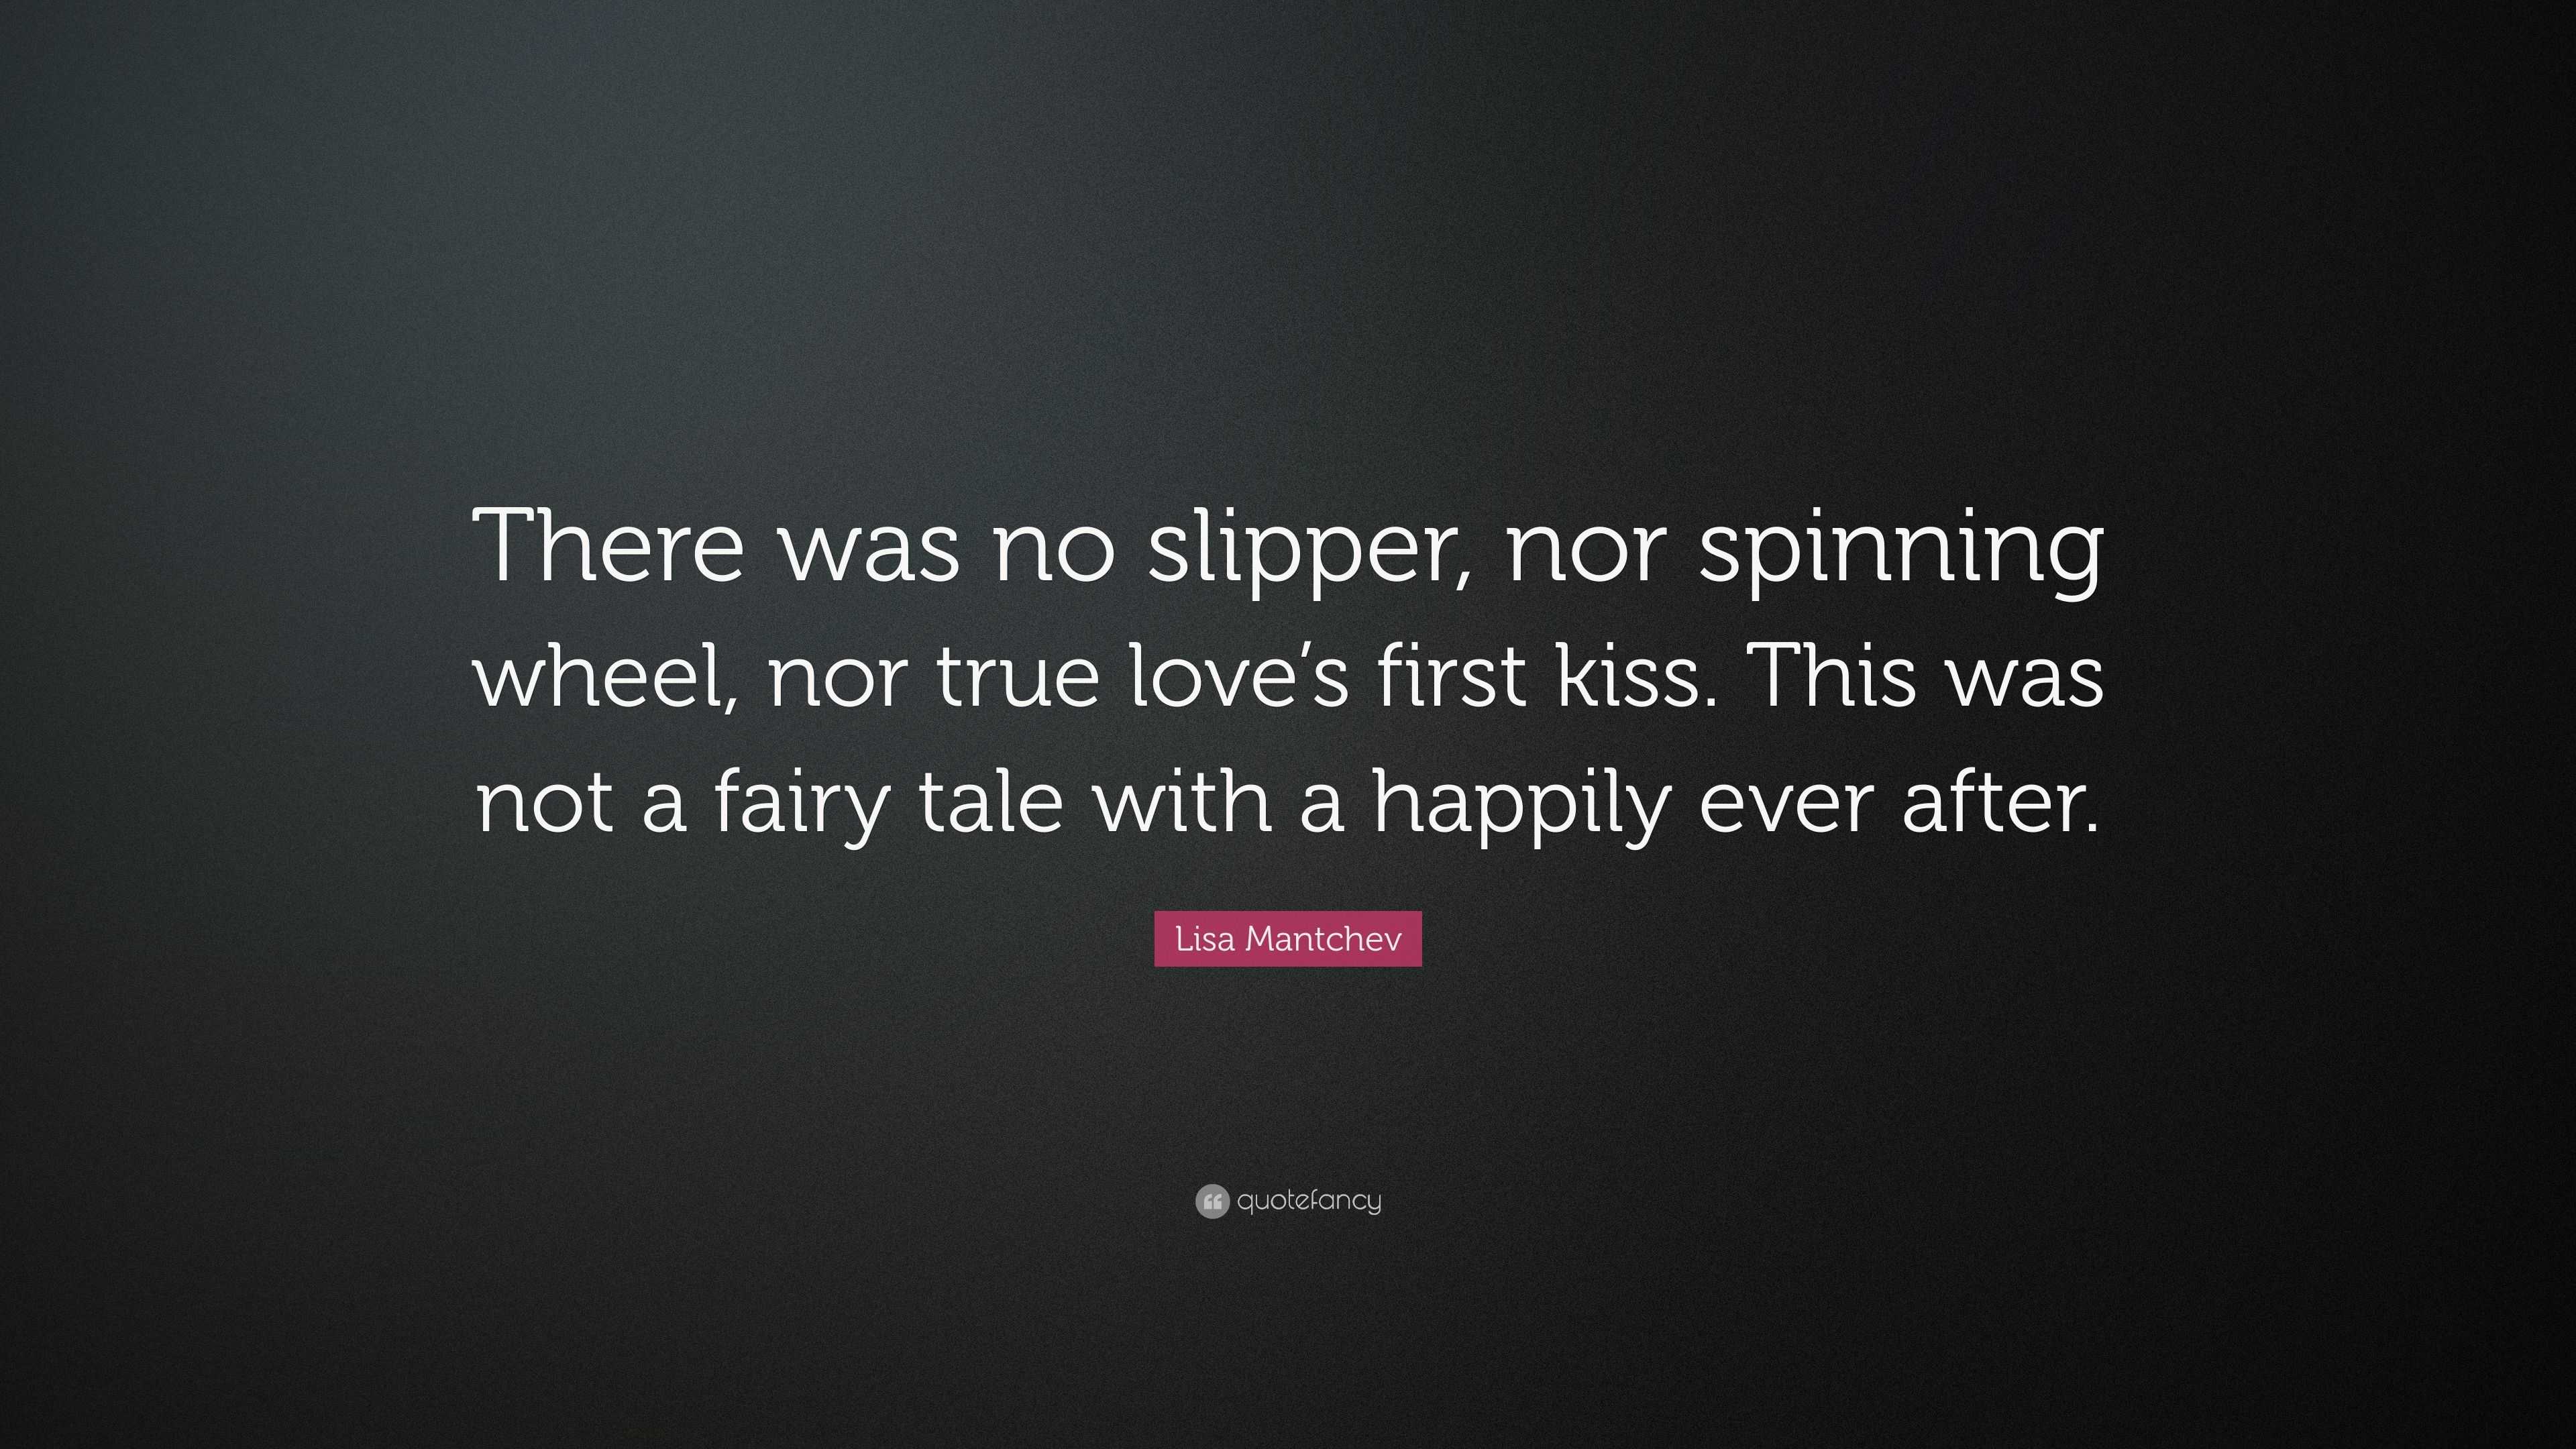 Lisa Mantchev Quote “There was no slipper nor spinning wheel nor true